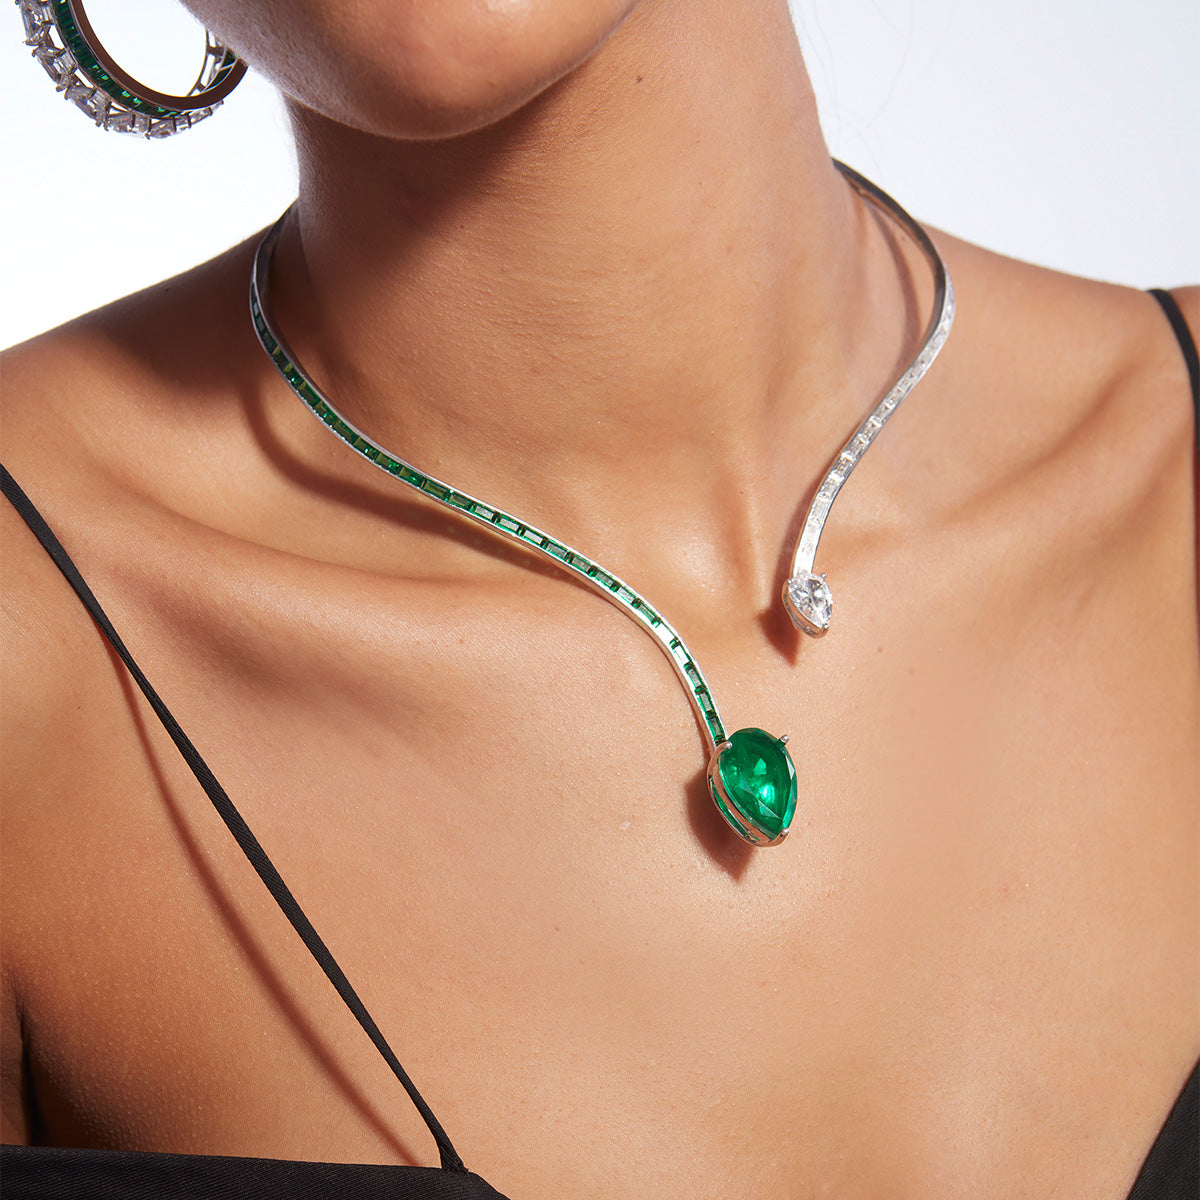 Bahamas 925 Silver Emerald Hydro Coil Necklace - Isharya | Modern Indian Jewelry